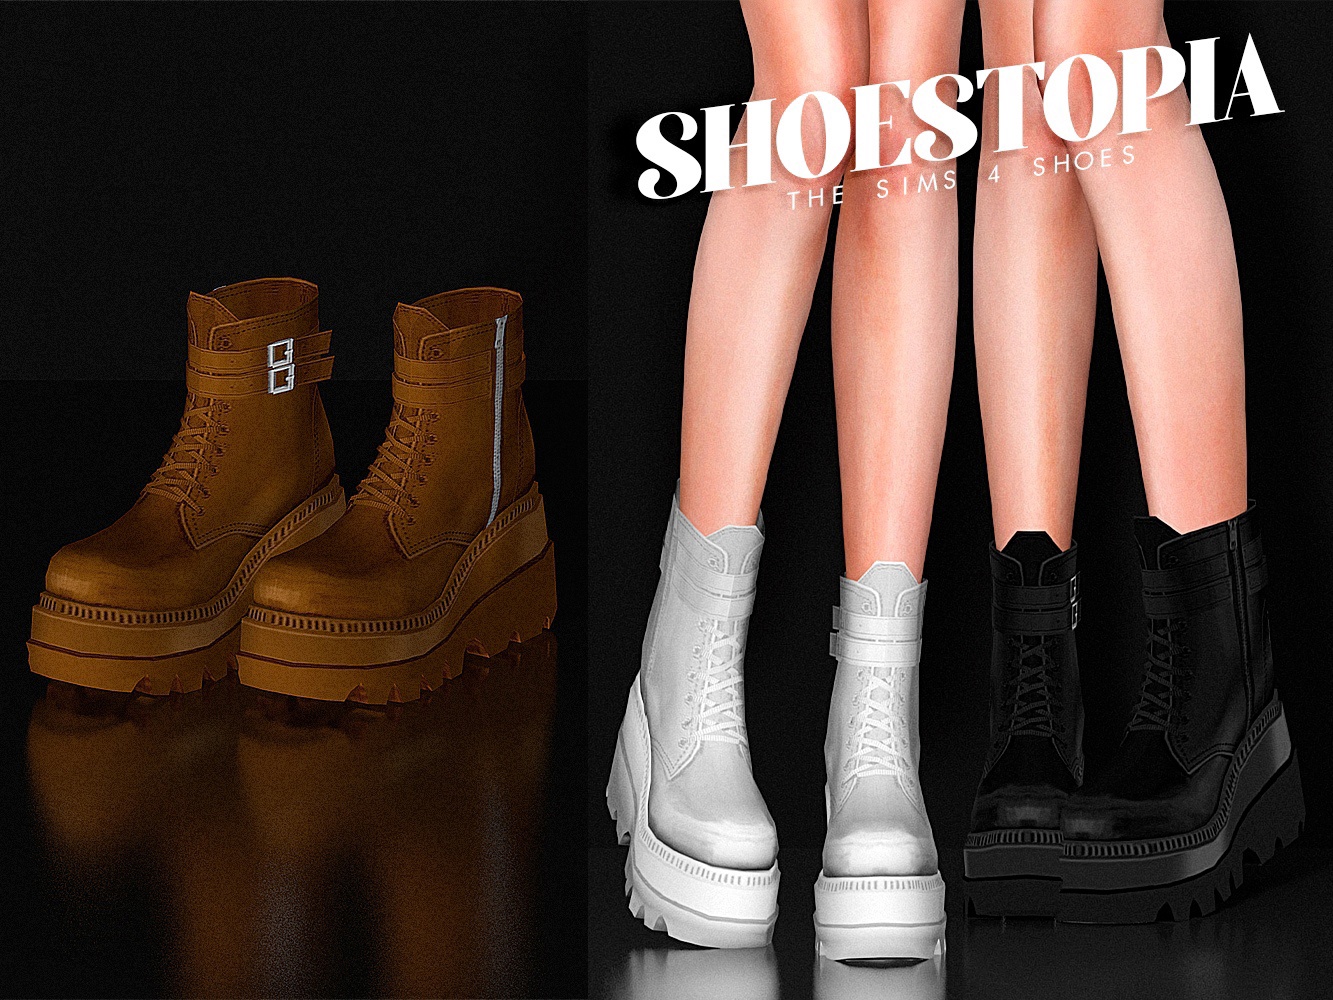 Pack Shoes - Custom Content TS4 by Shoestopia - Packs / Collections ...